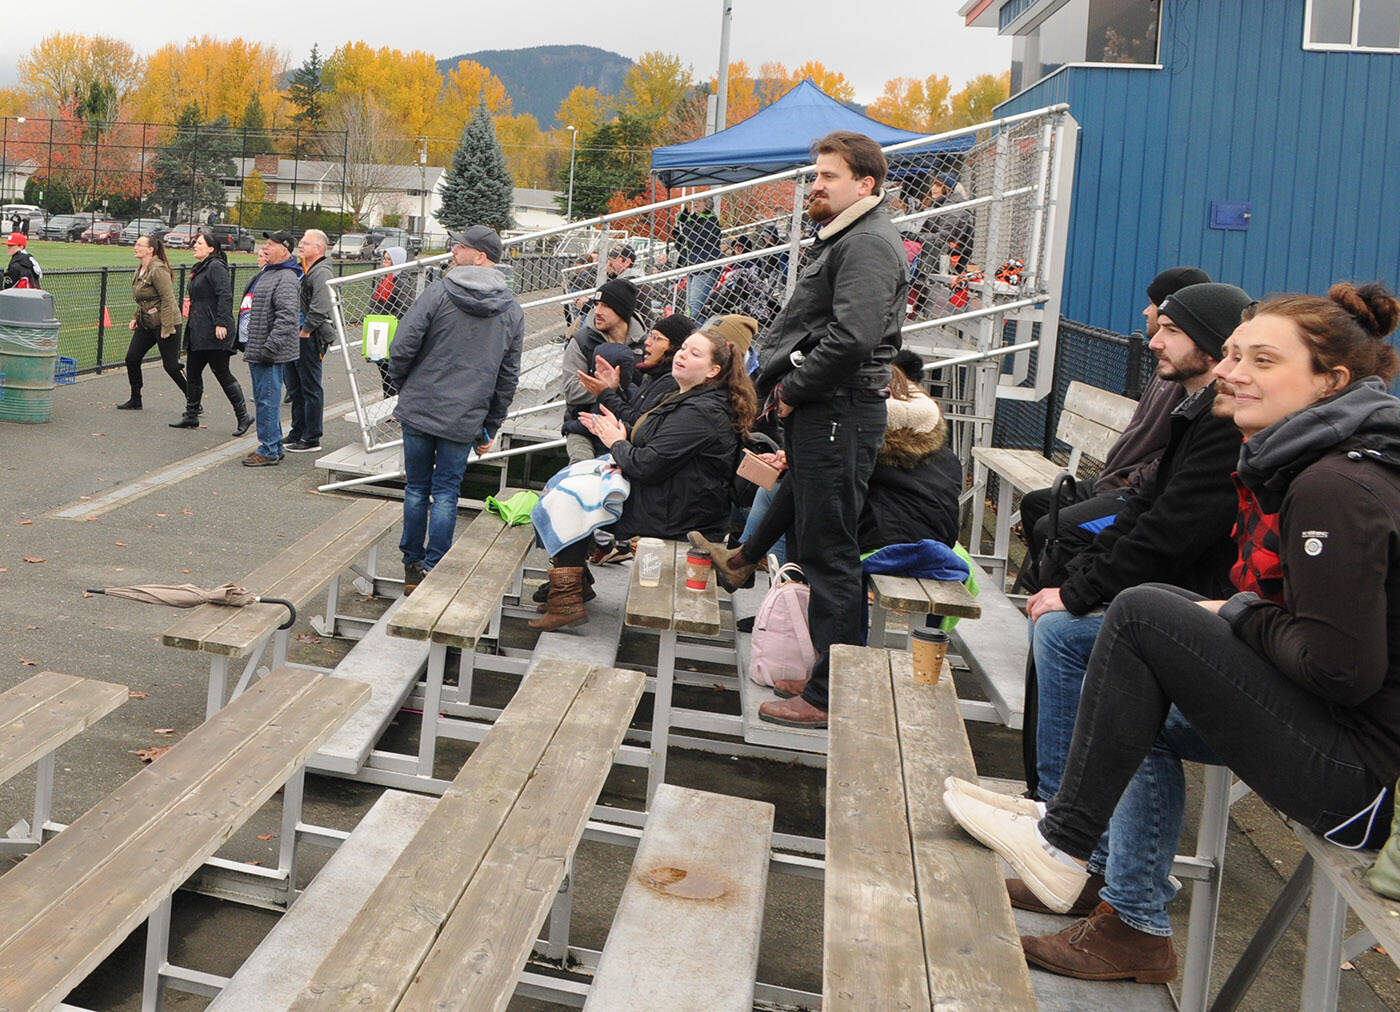 This small group of anti-vaxxers seated in the bleachers got their way past security and into a Chilliwack Giants football game at Townsend Park on Saturday, Nov. 6, 2021. (Jenna Hauck/ Chilliwack Progress)